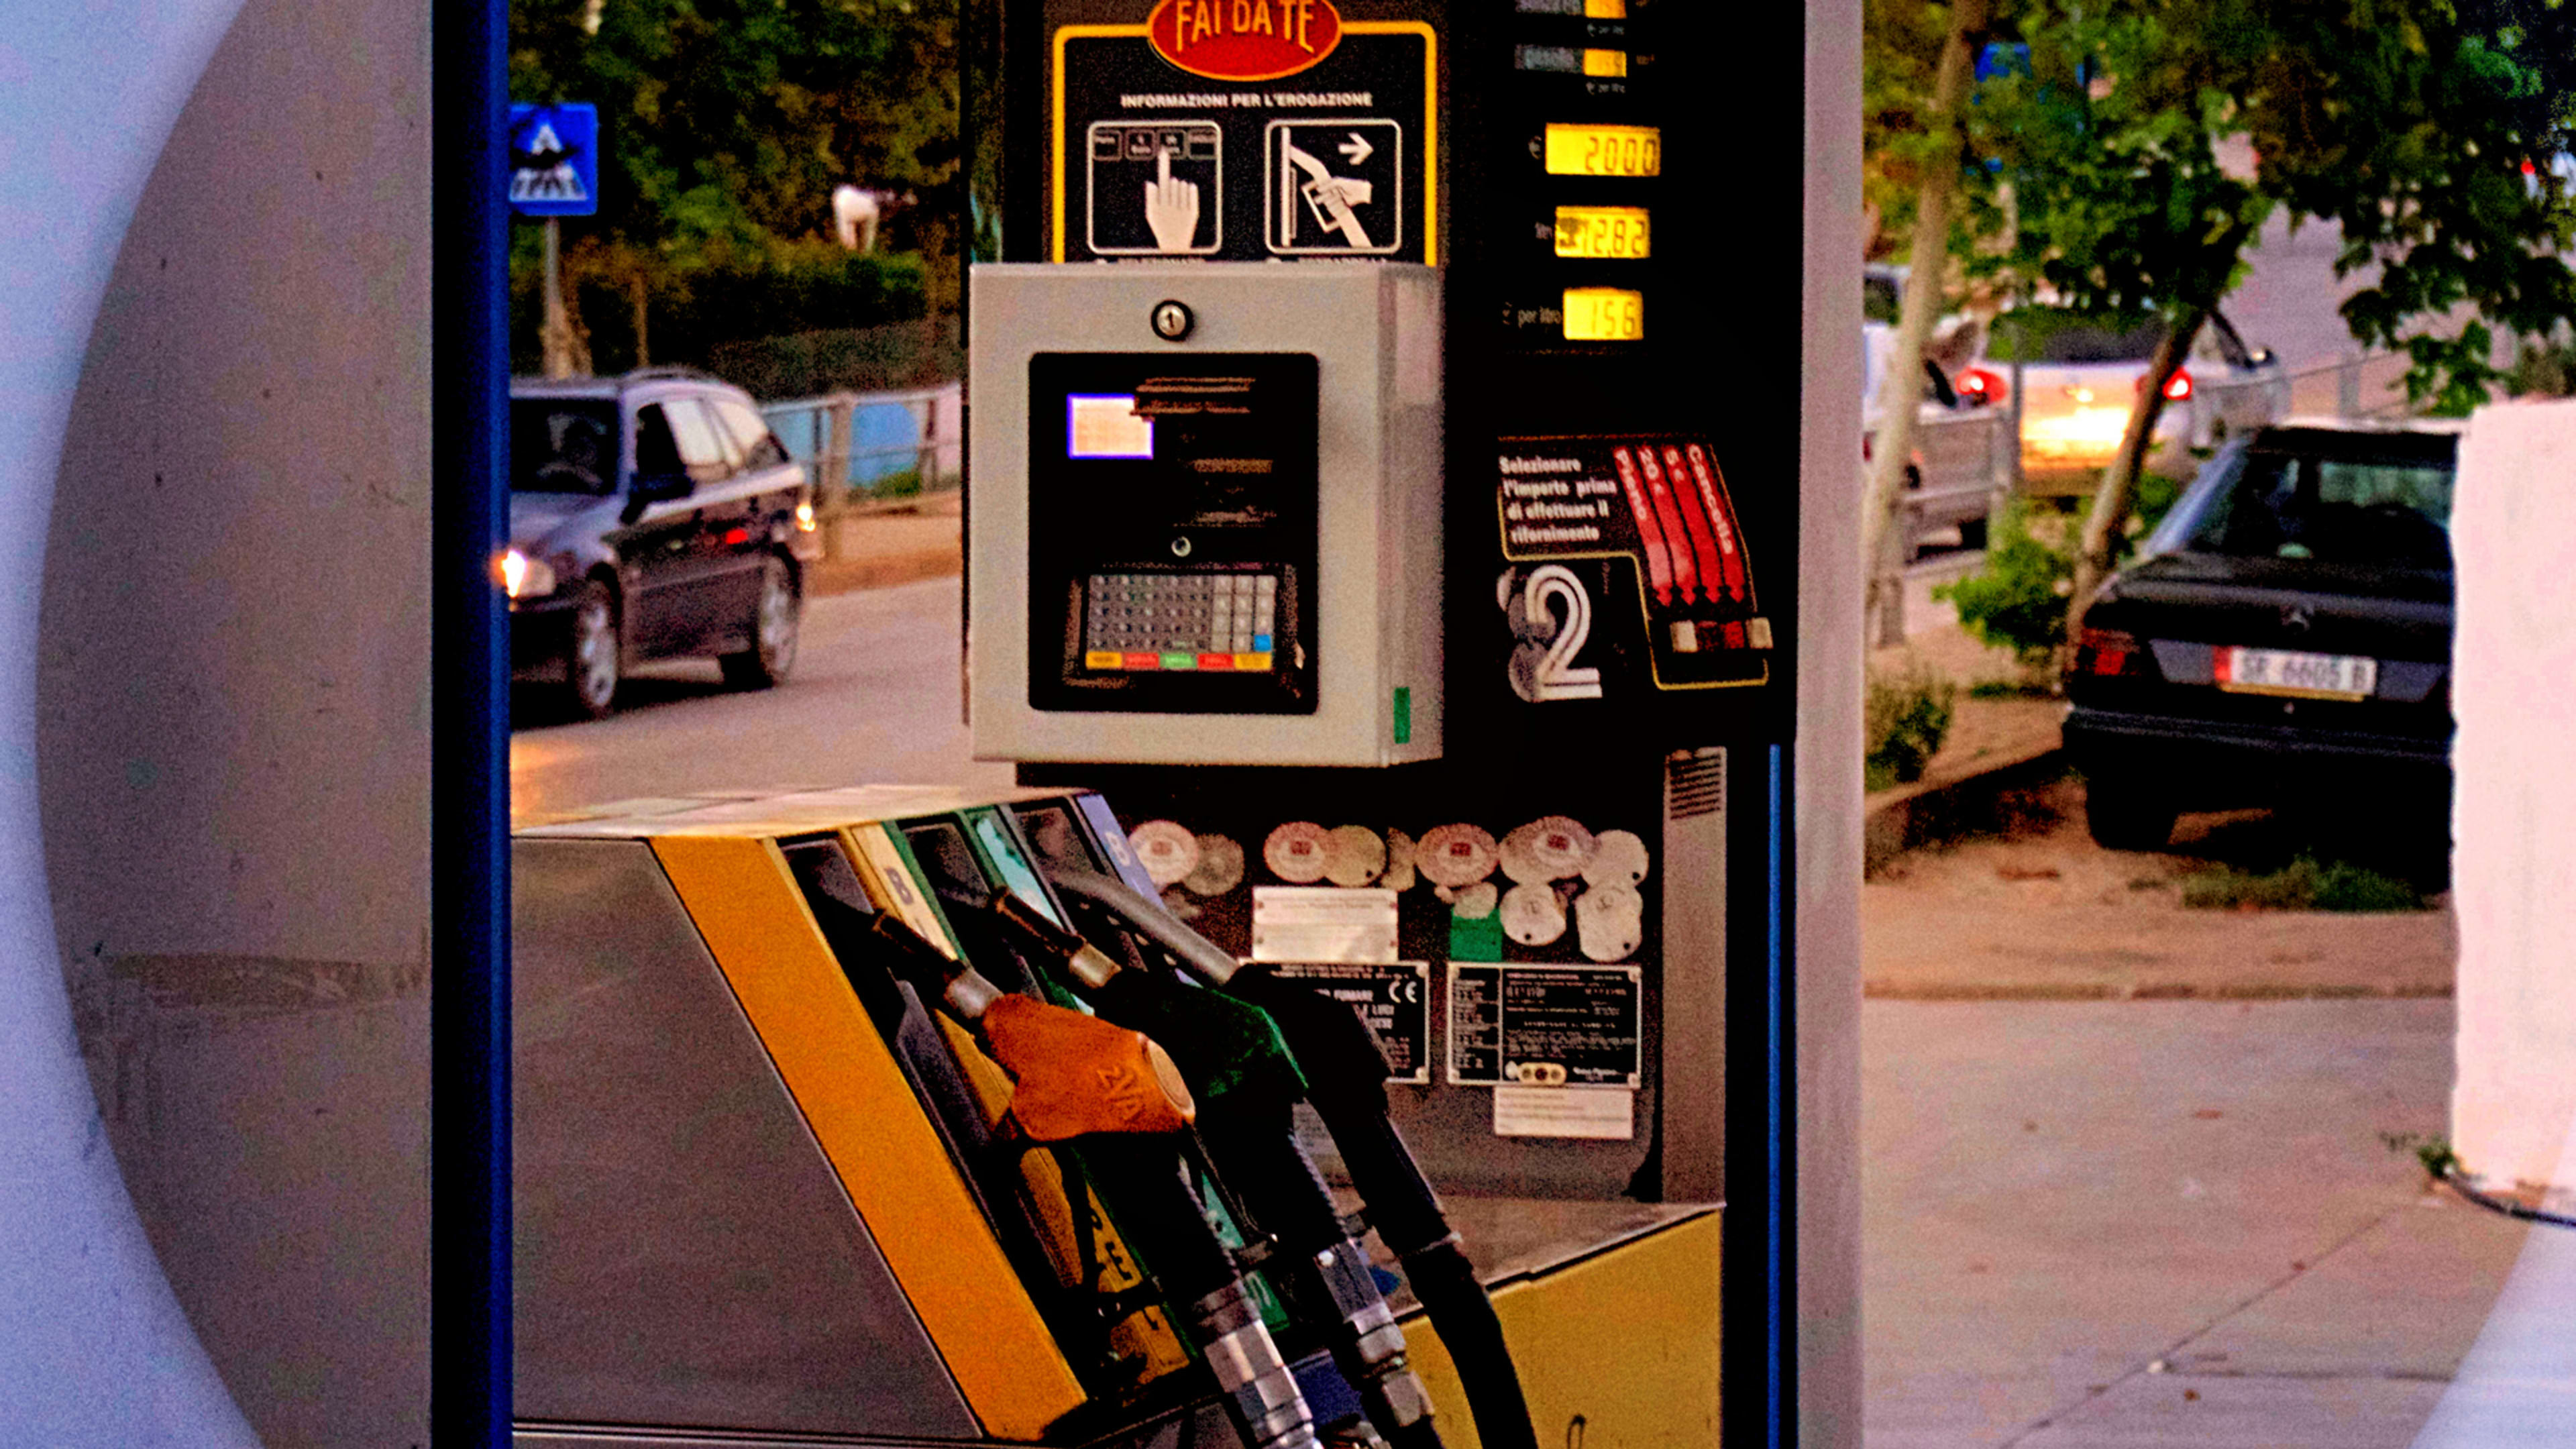 Secret Service warning: High-tech thieves can remotely skim credit cards at gas pumps